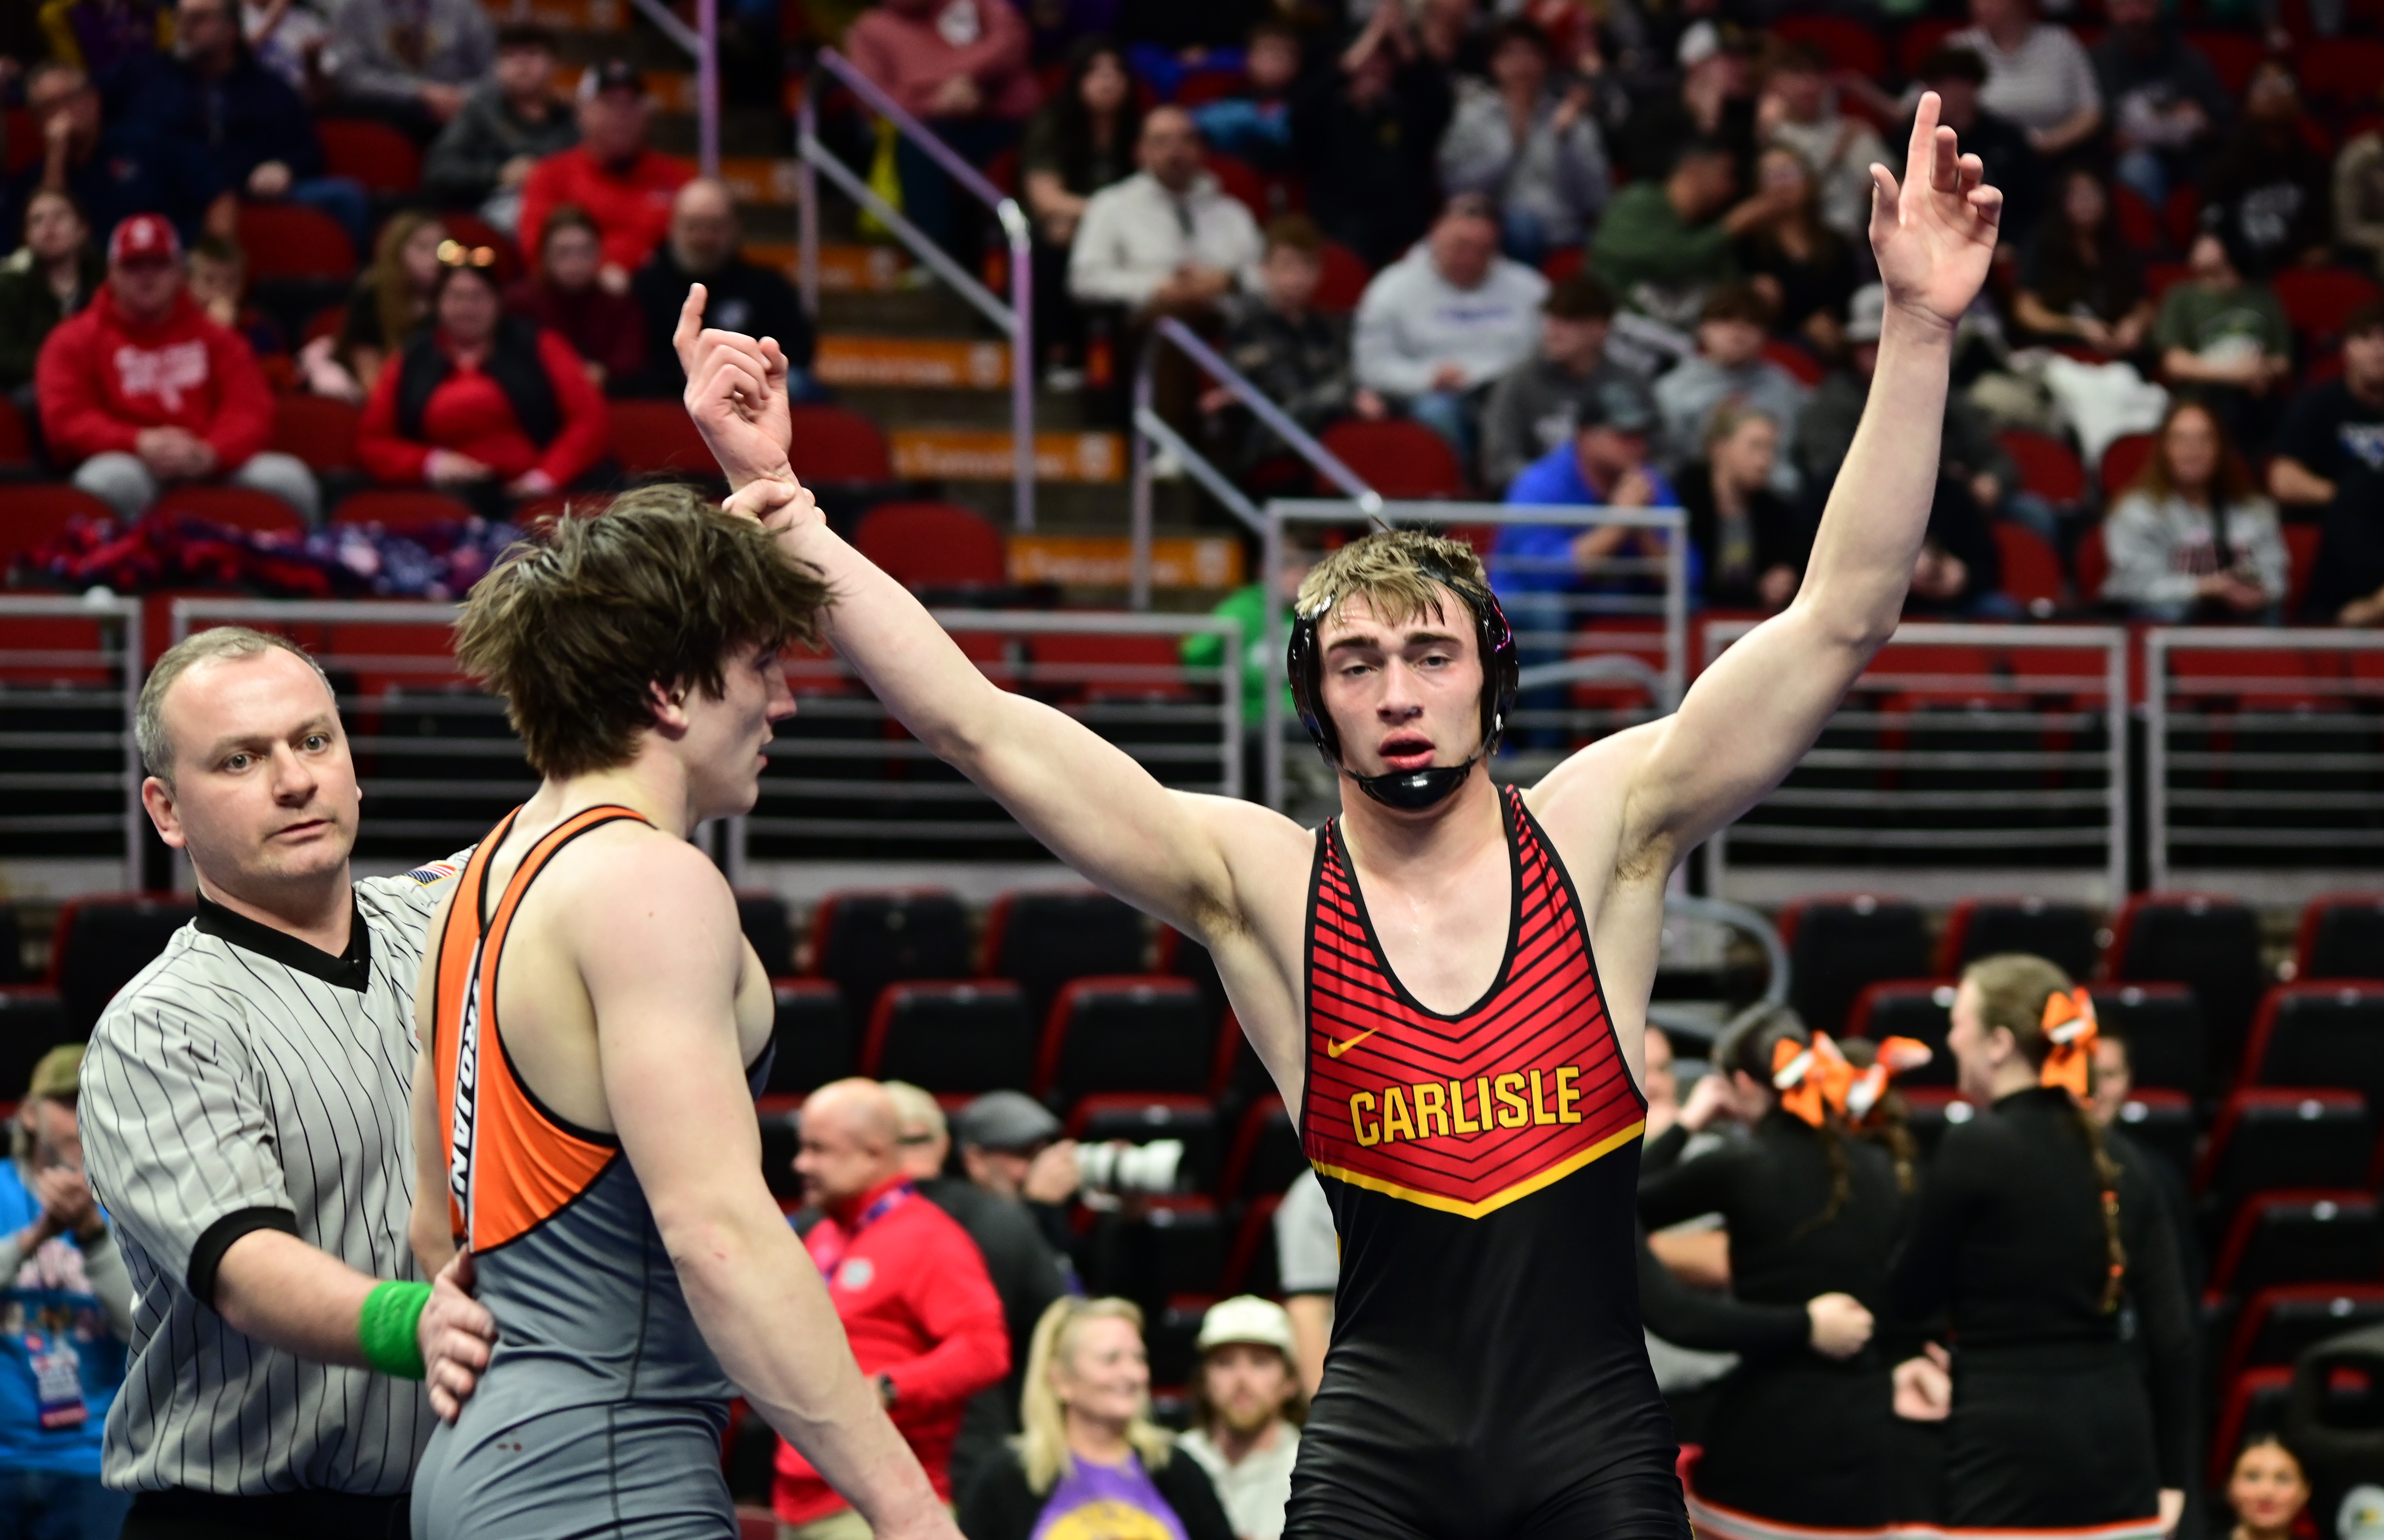 Carlisle's Asa Hemsted gets his hand raised after beating three-time state champion Maximus Magayna of Waterloo East during a Class 3A 175-pound semifinal match at the Iowa high school state wrestling tournament at Wells Fargo Arena in Des Moines on Friday. (Photo by Ryan Timmerman)